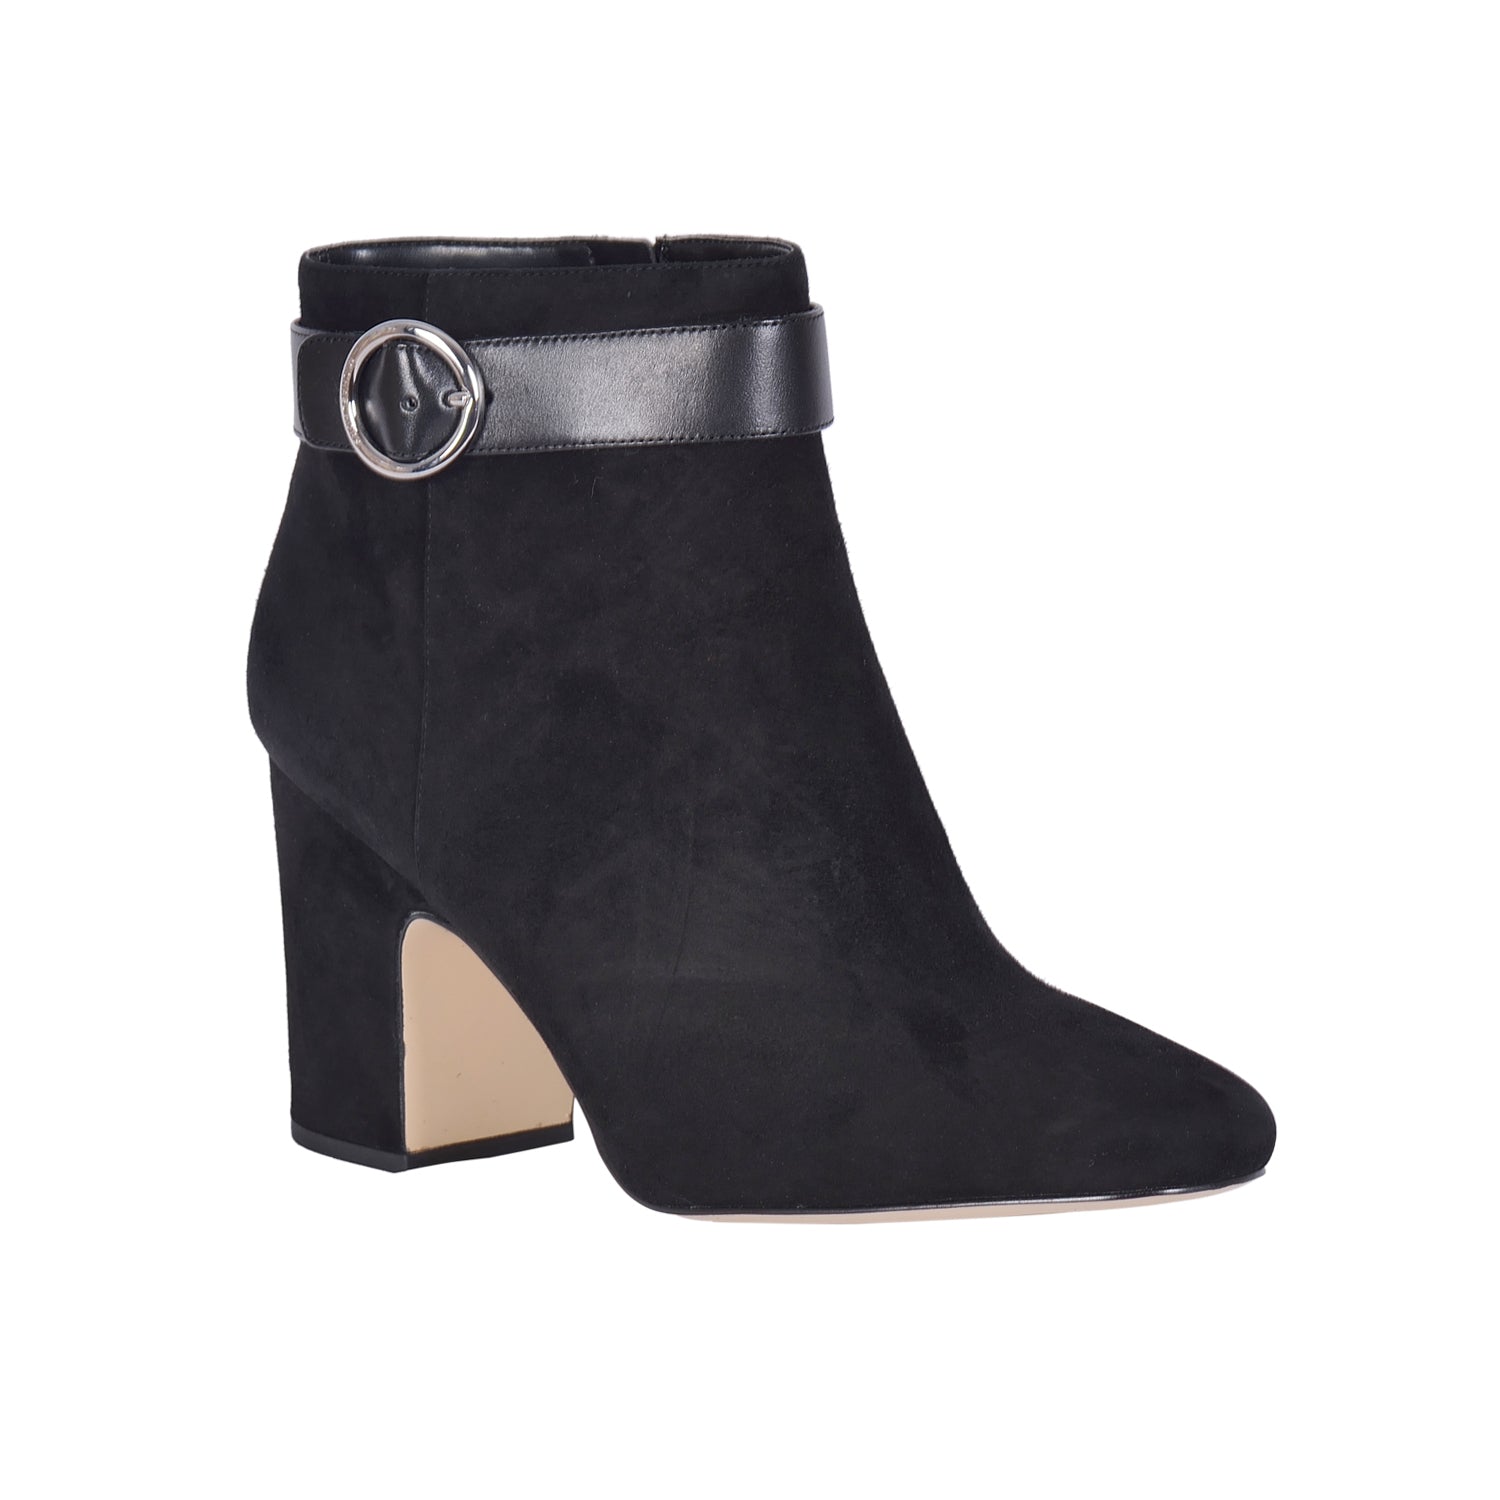 MICHAEL KORS Alana Black Suede Ankle Boots – Galleria di Lux